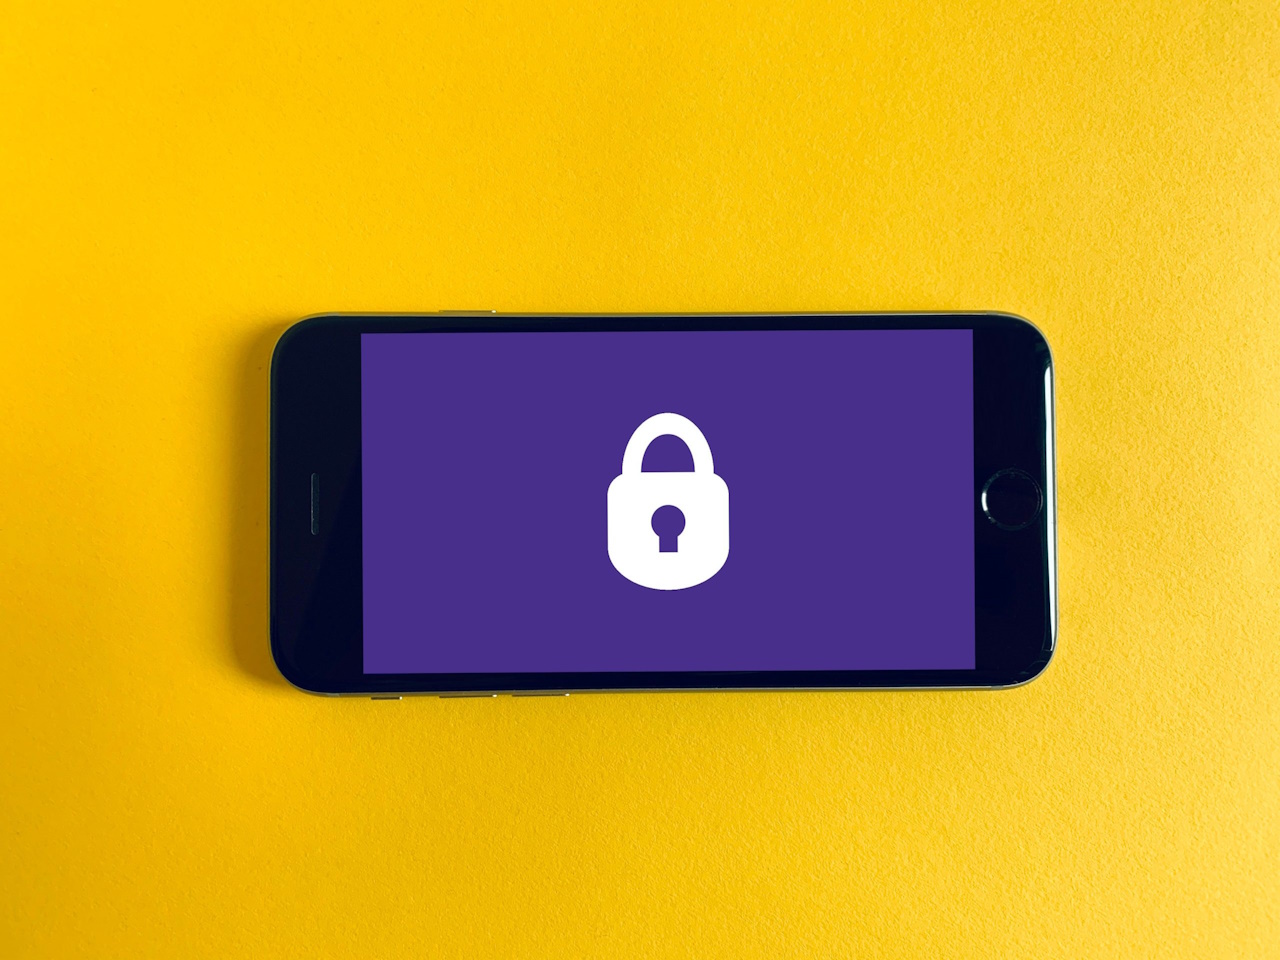 Top 5 threats to your mobile phone